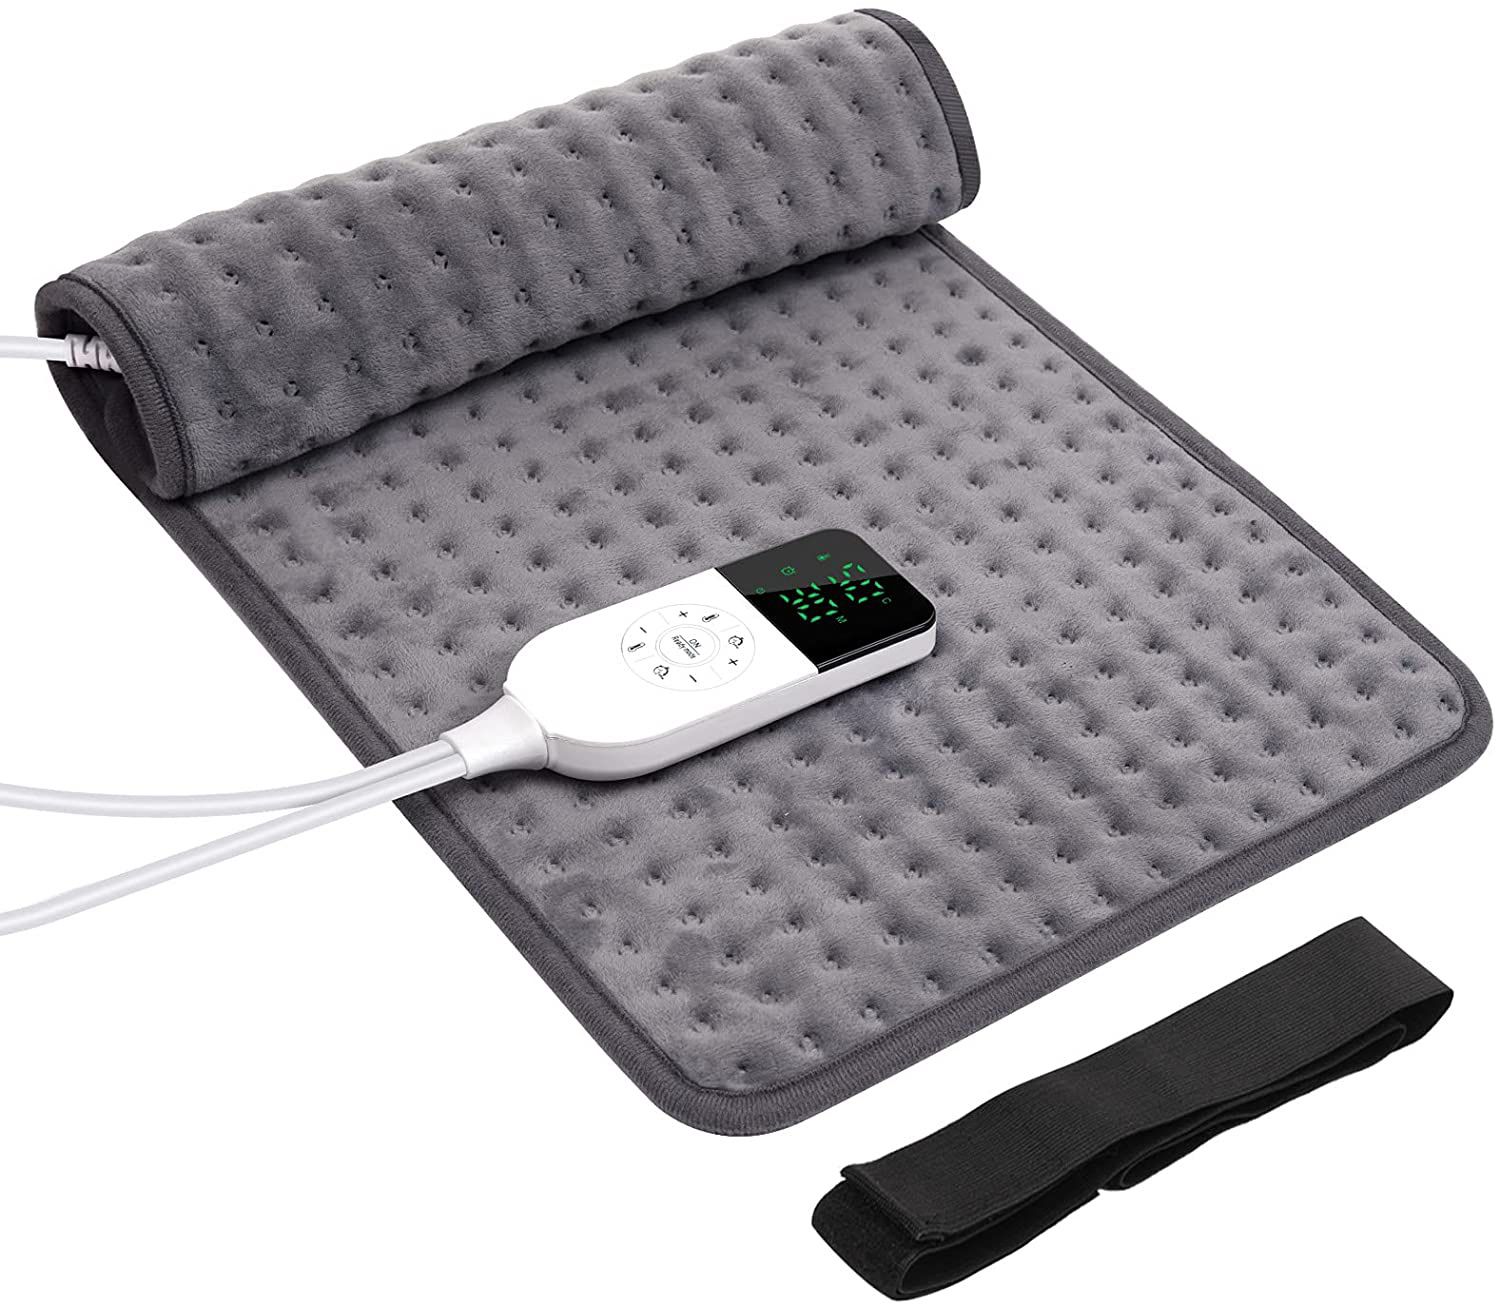 New heating pad with timer and temperature choices￼